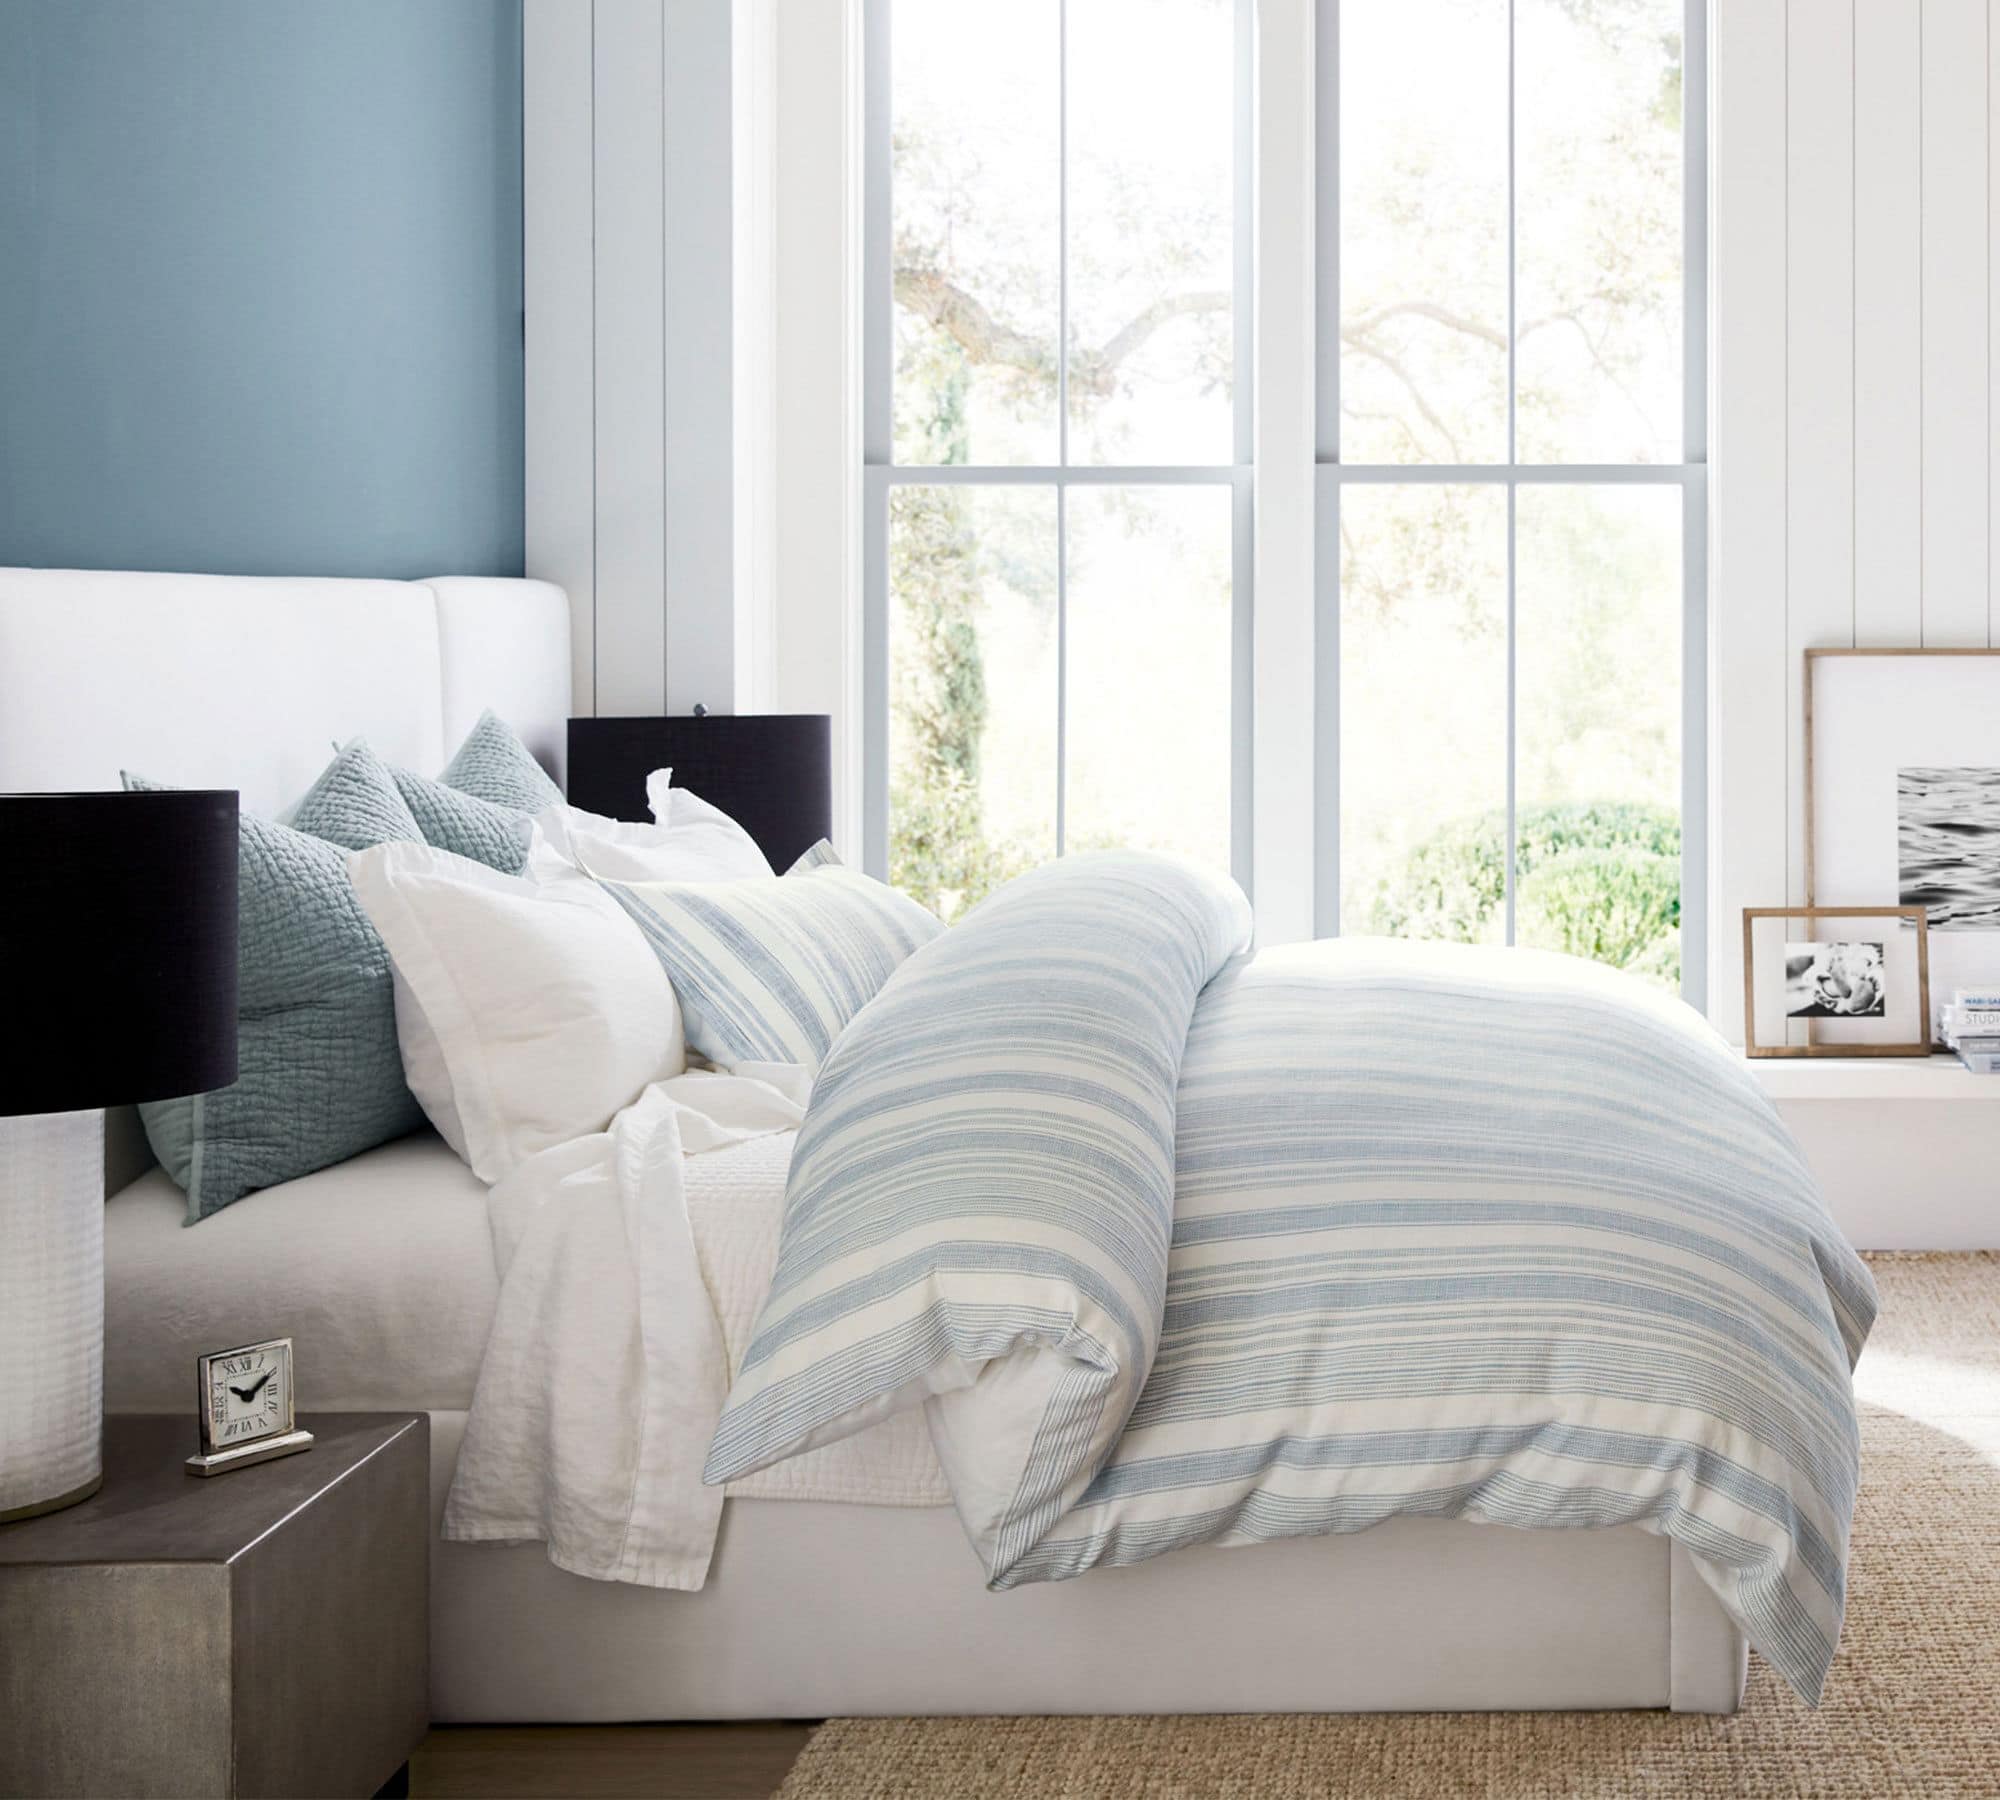 light blue comforter with white bedding on a white upholstered bed.